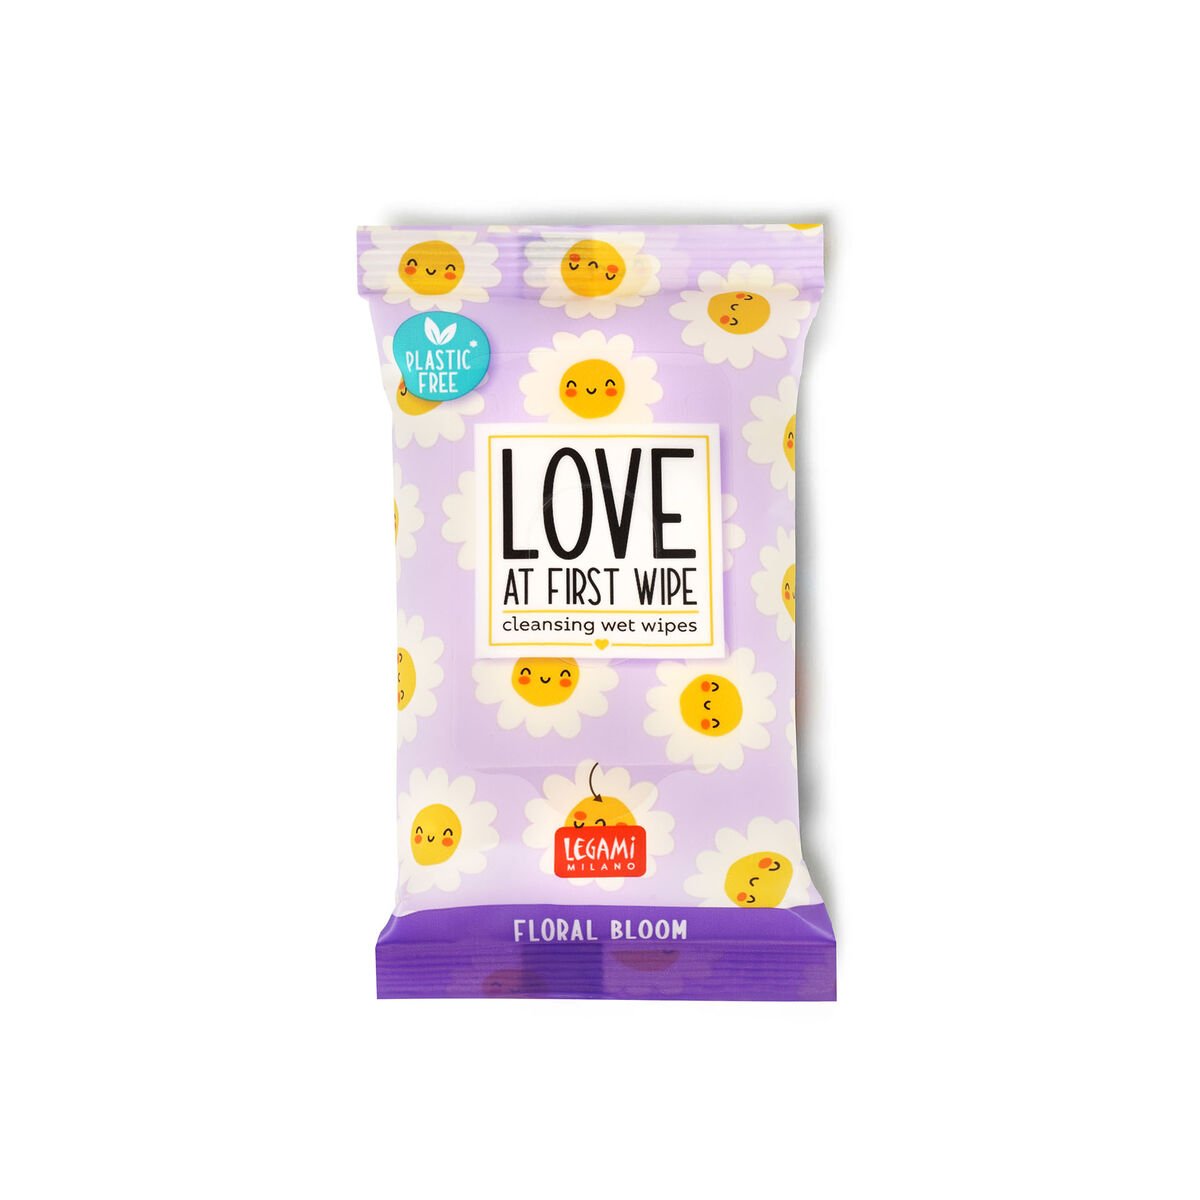 10 Wet Wipes - Love At First Wipe, , zoo